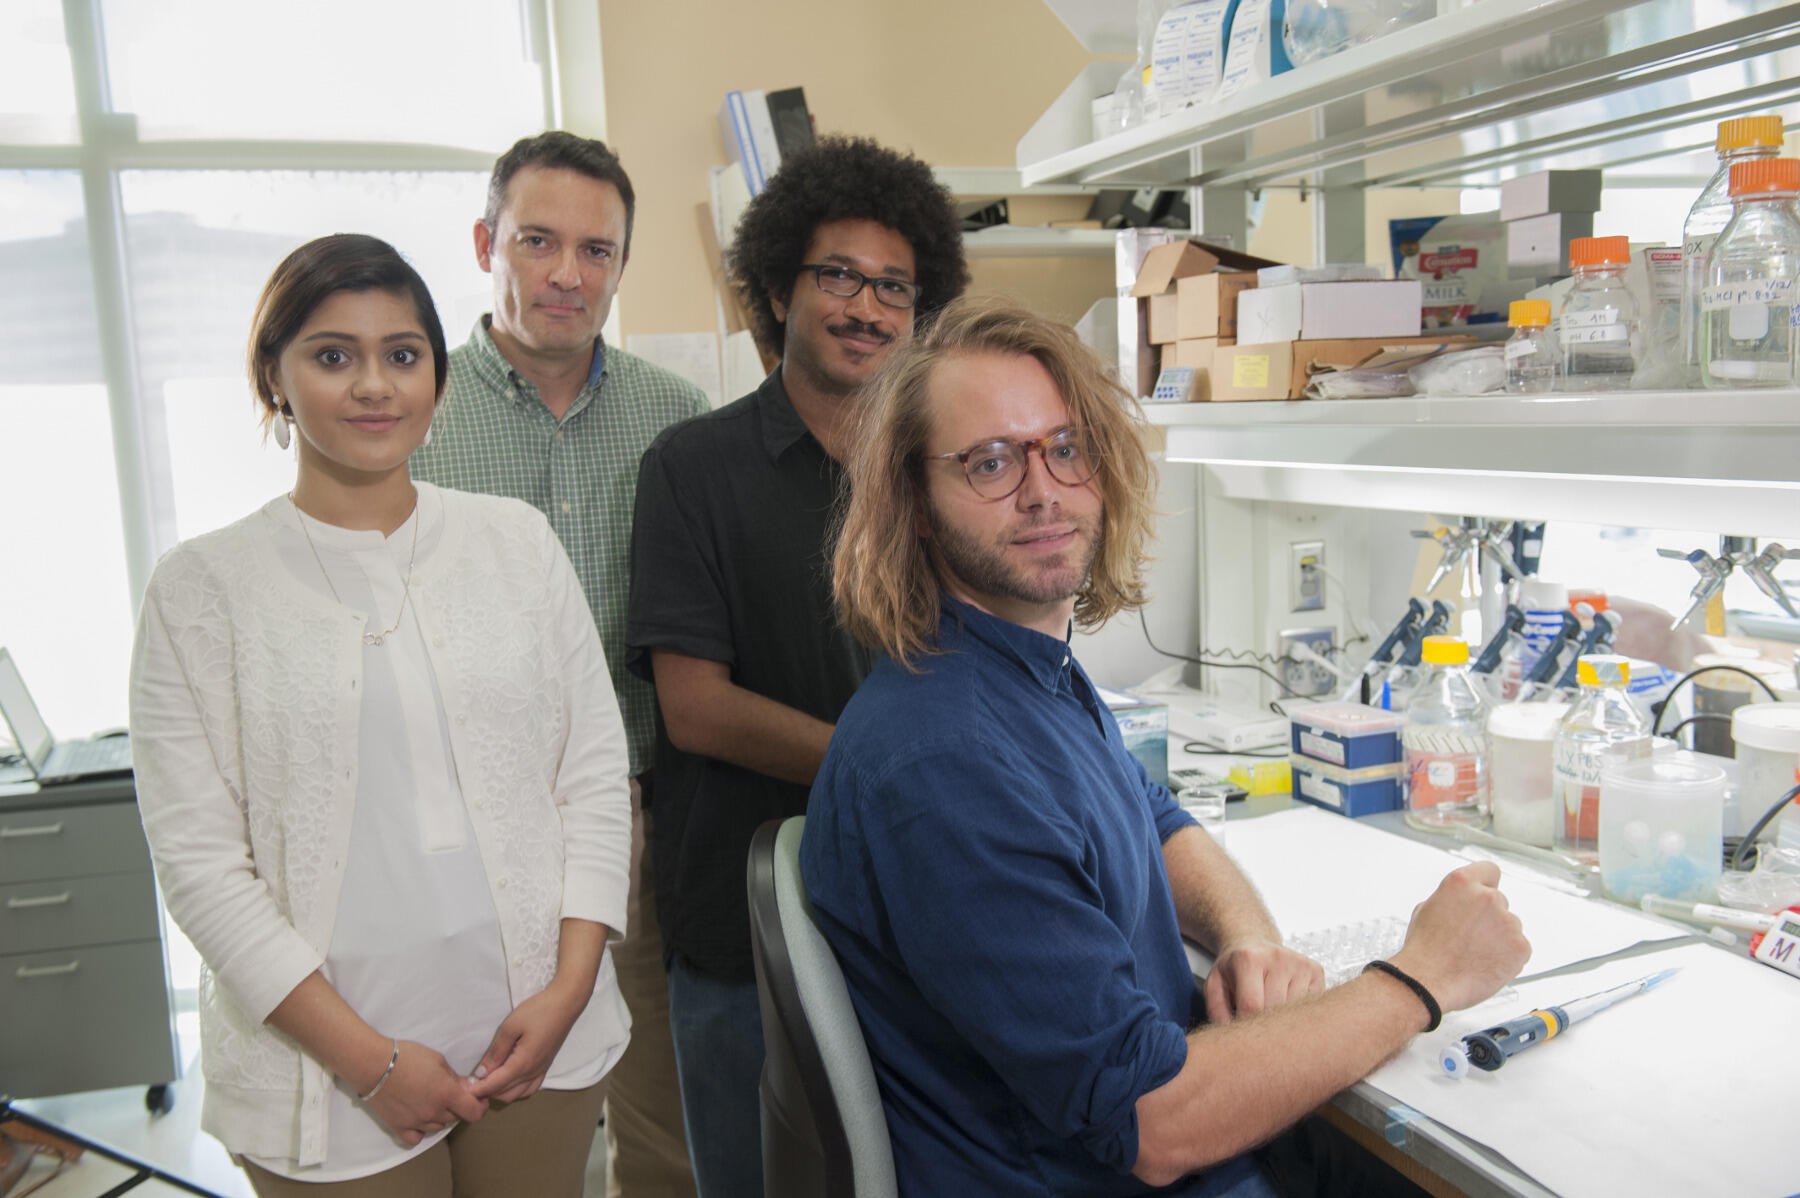 Members of González-Maeso lab group, who worked extensively on the published findings, from left to right: Maryum Ijaz, Javier González-Maeso, Ph.D.; Justin Saunders, Mario de la Fuente Revenga, Ph.D. 
<br>Photo by Tom Kojcsich, University Marketing
